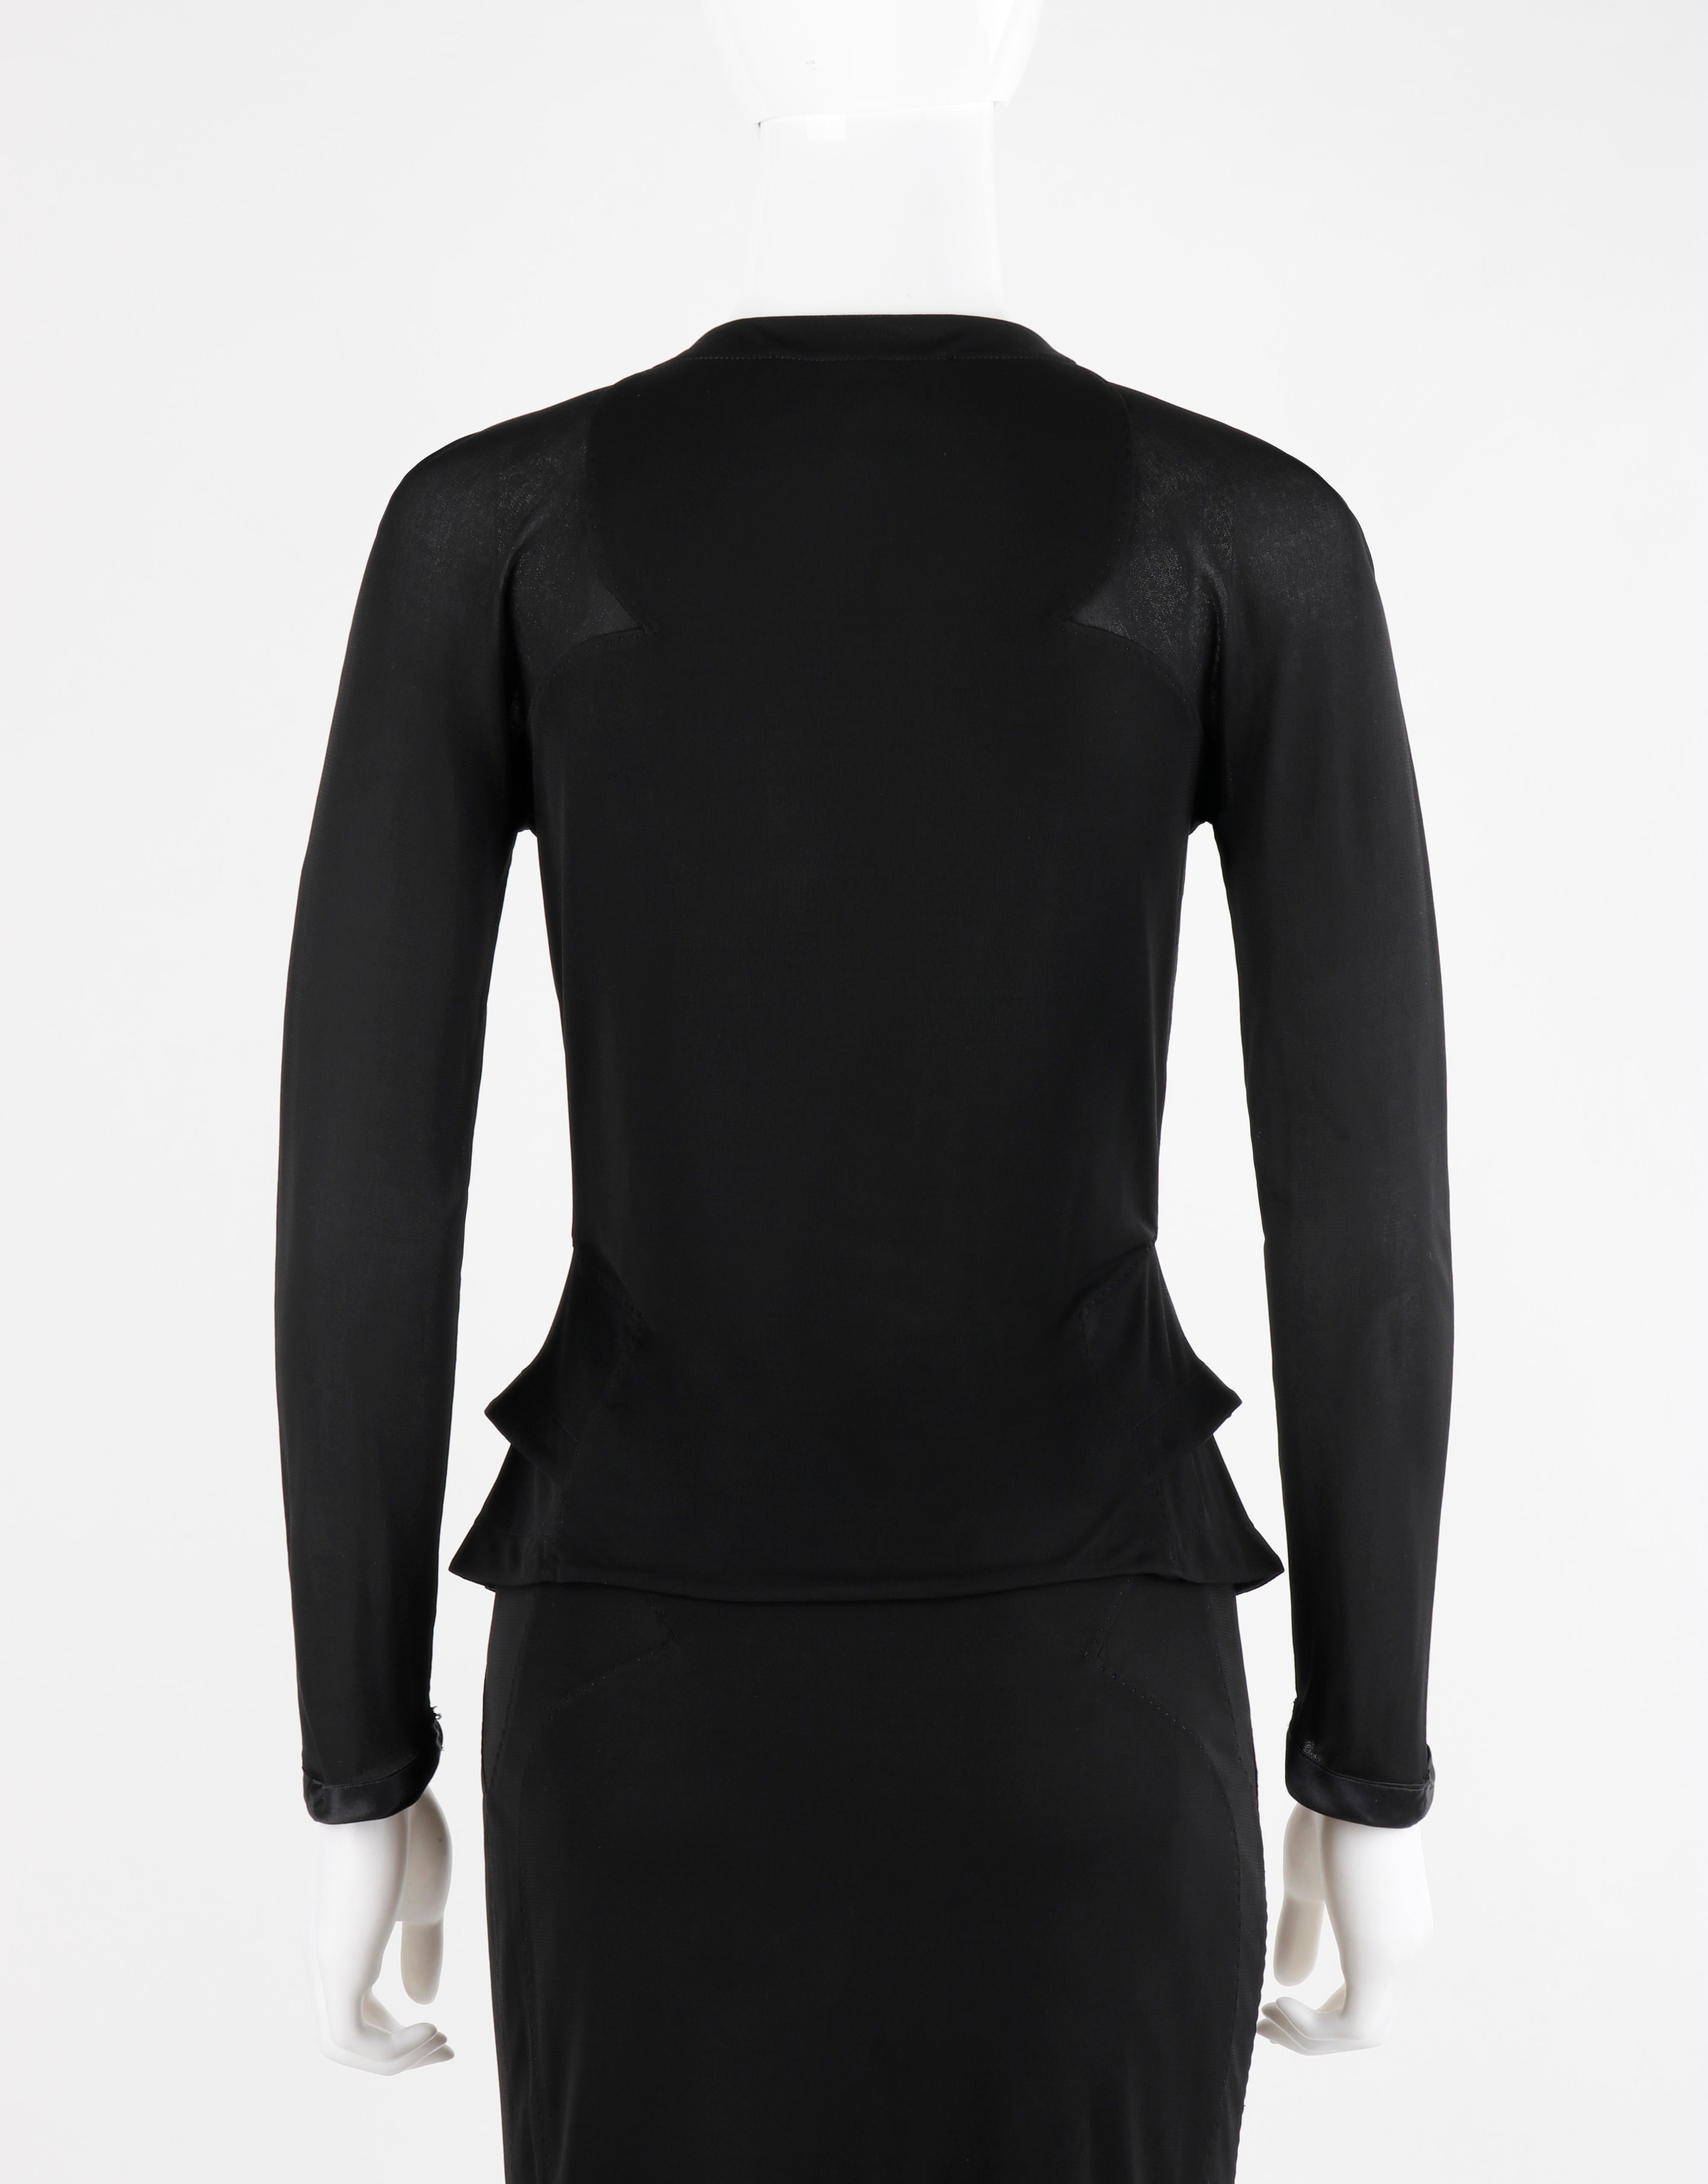 pencil skirt suit for wedding